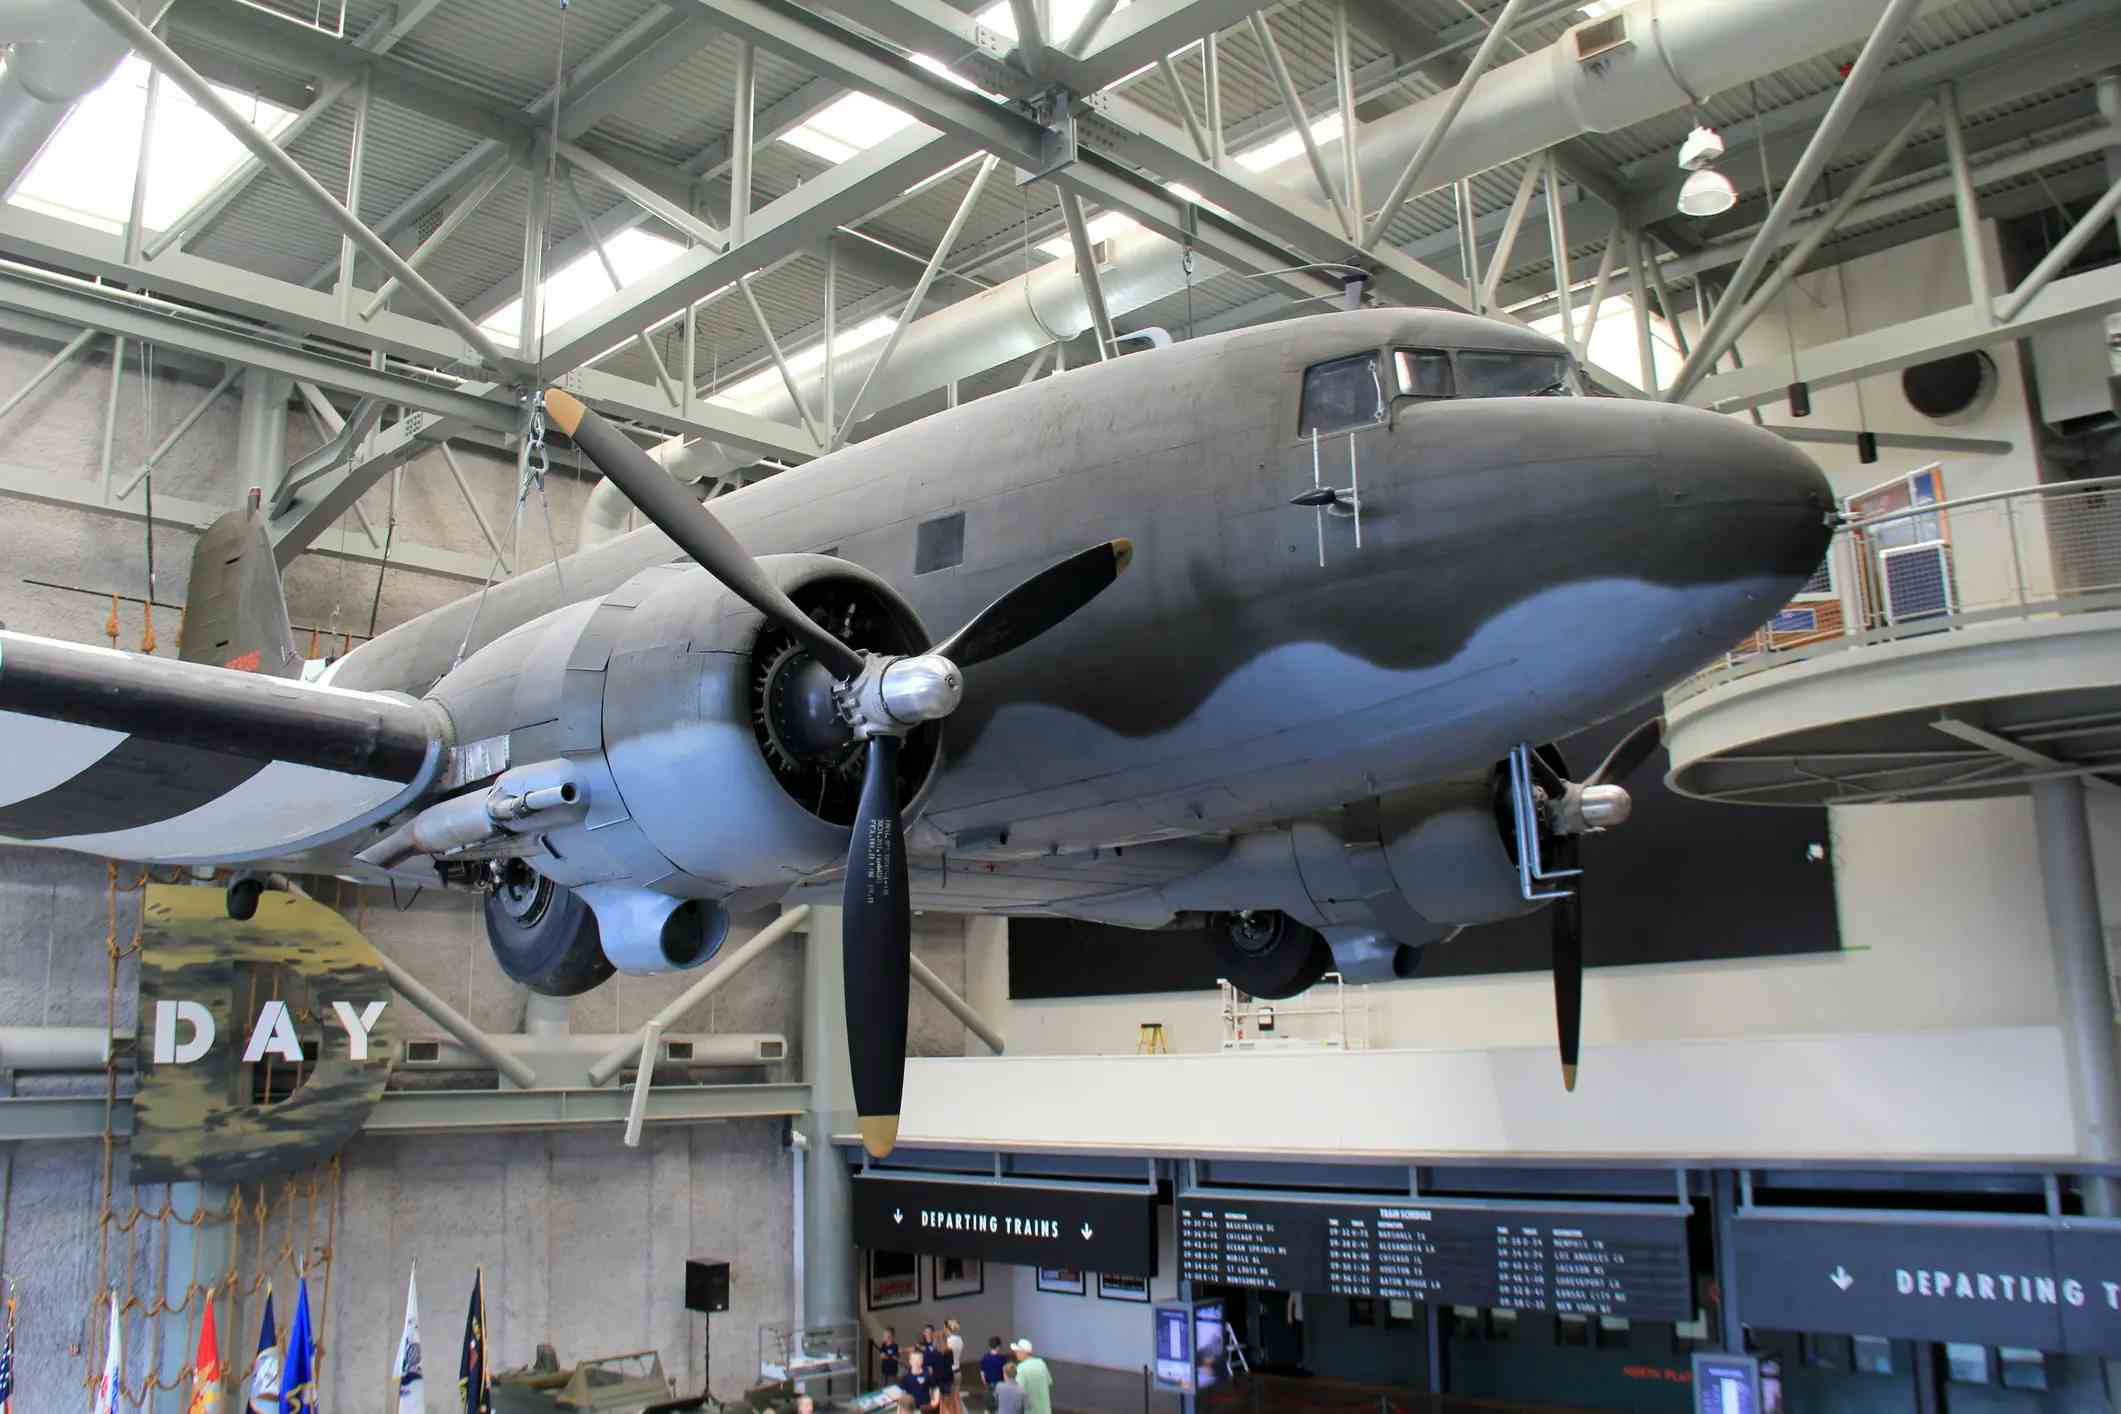 The National WWII Museum image